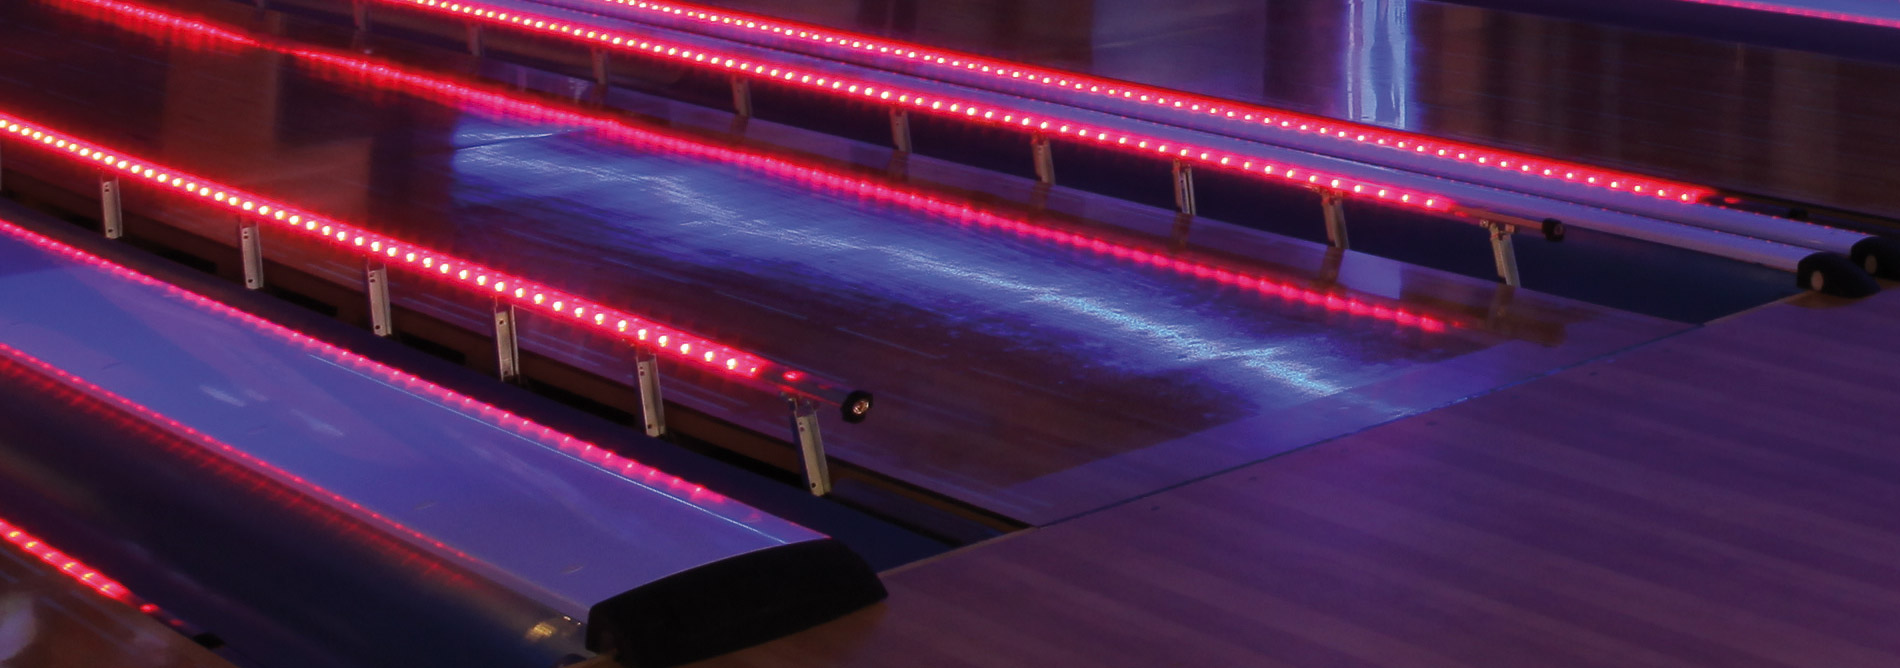 Bowling-QubicaAMF-Lane-Accessories-banner.jpg